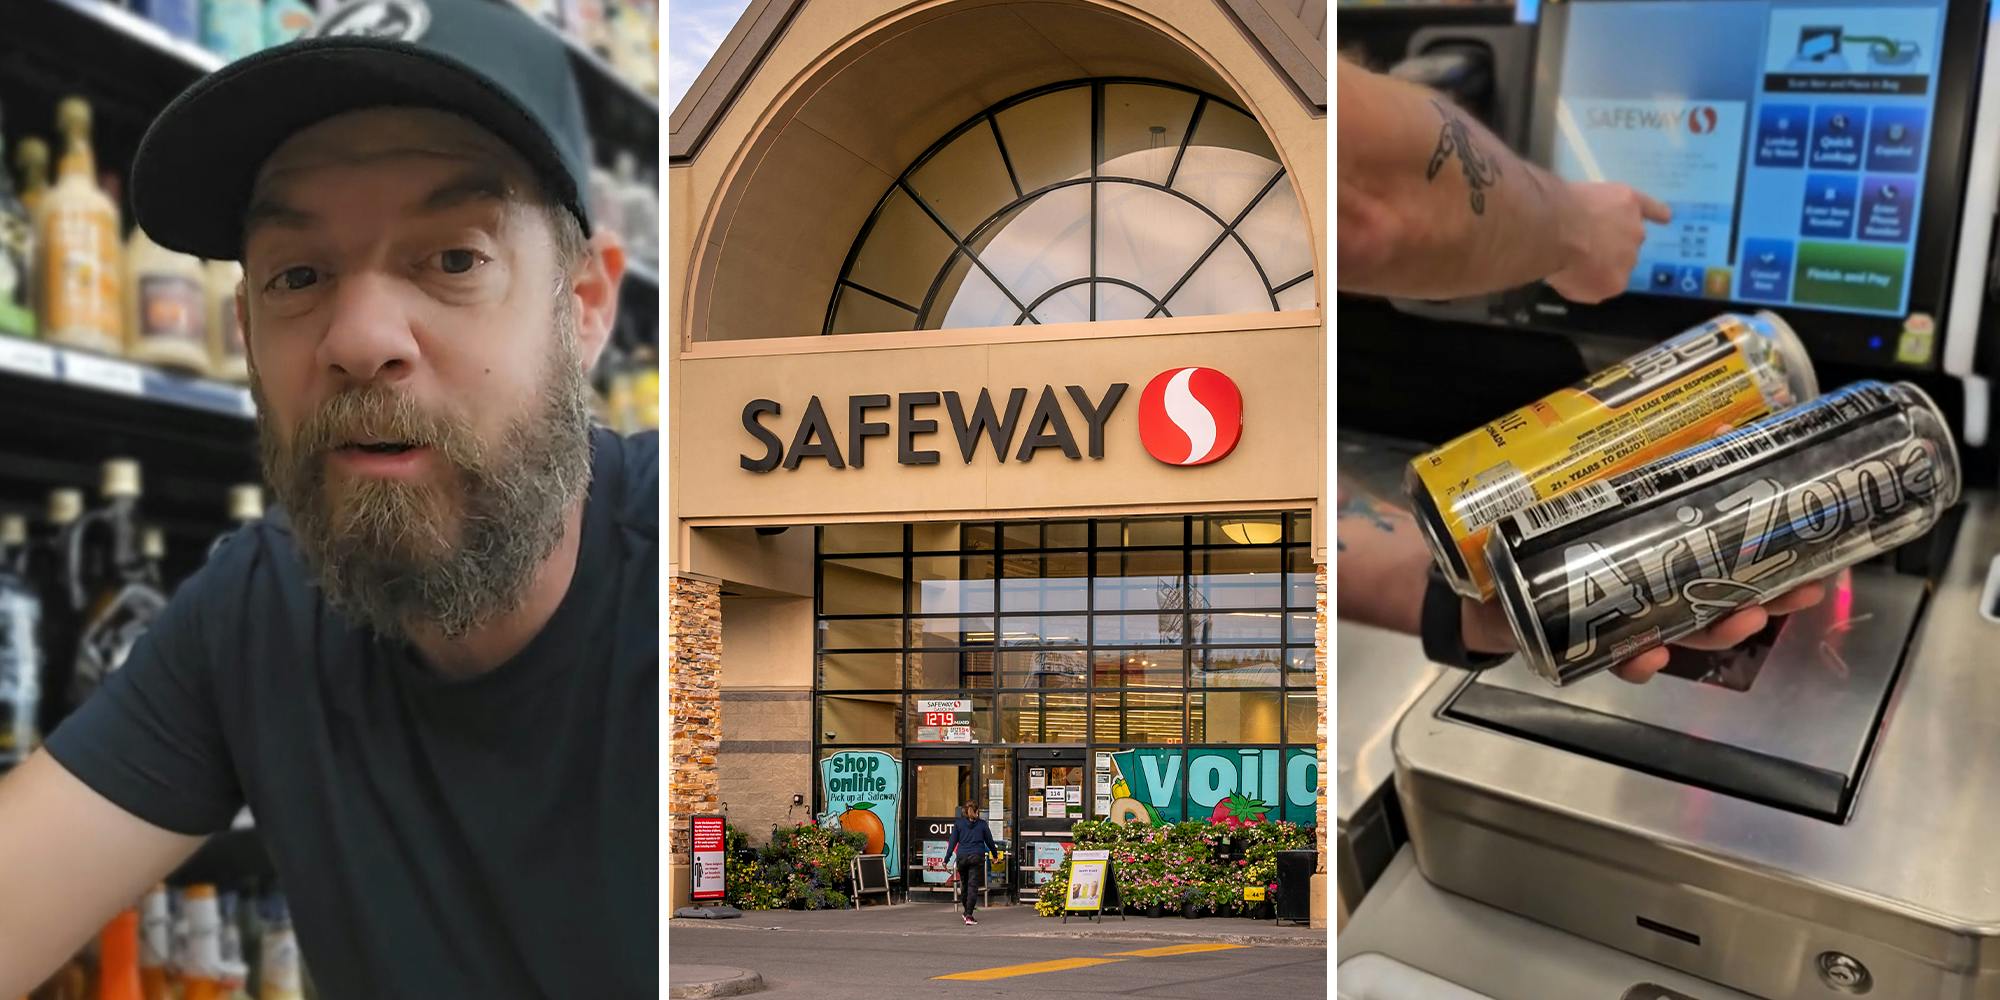 Man shows how easy it is for minors to purchase alcohol using self-checkout at places like Walmart, Safeway, and King Soopers